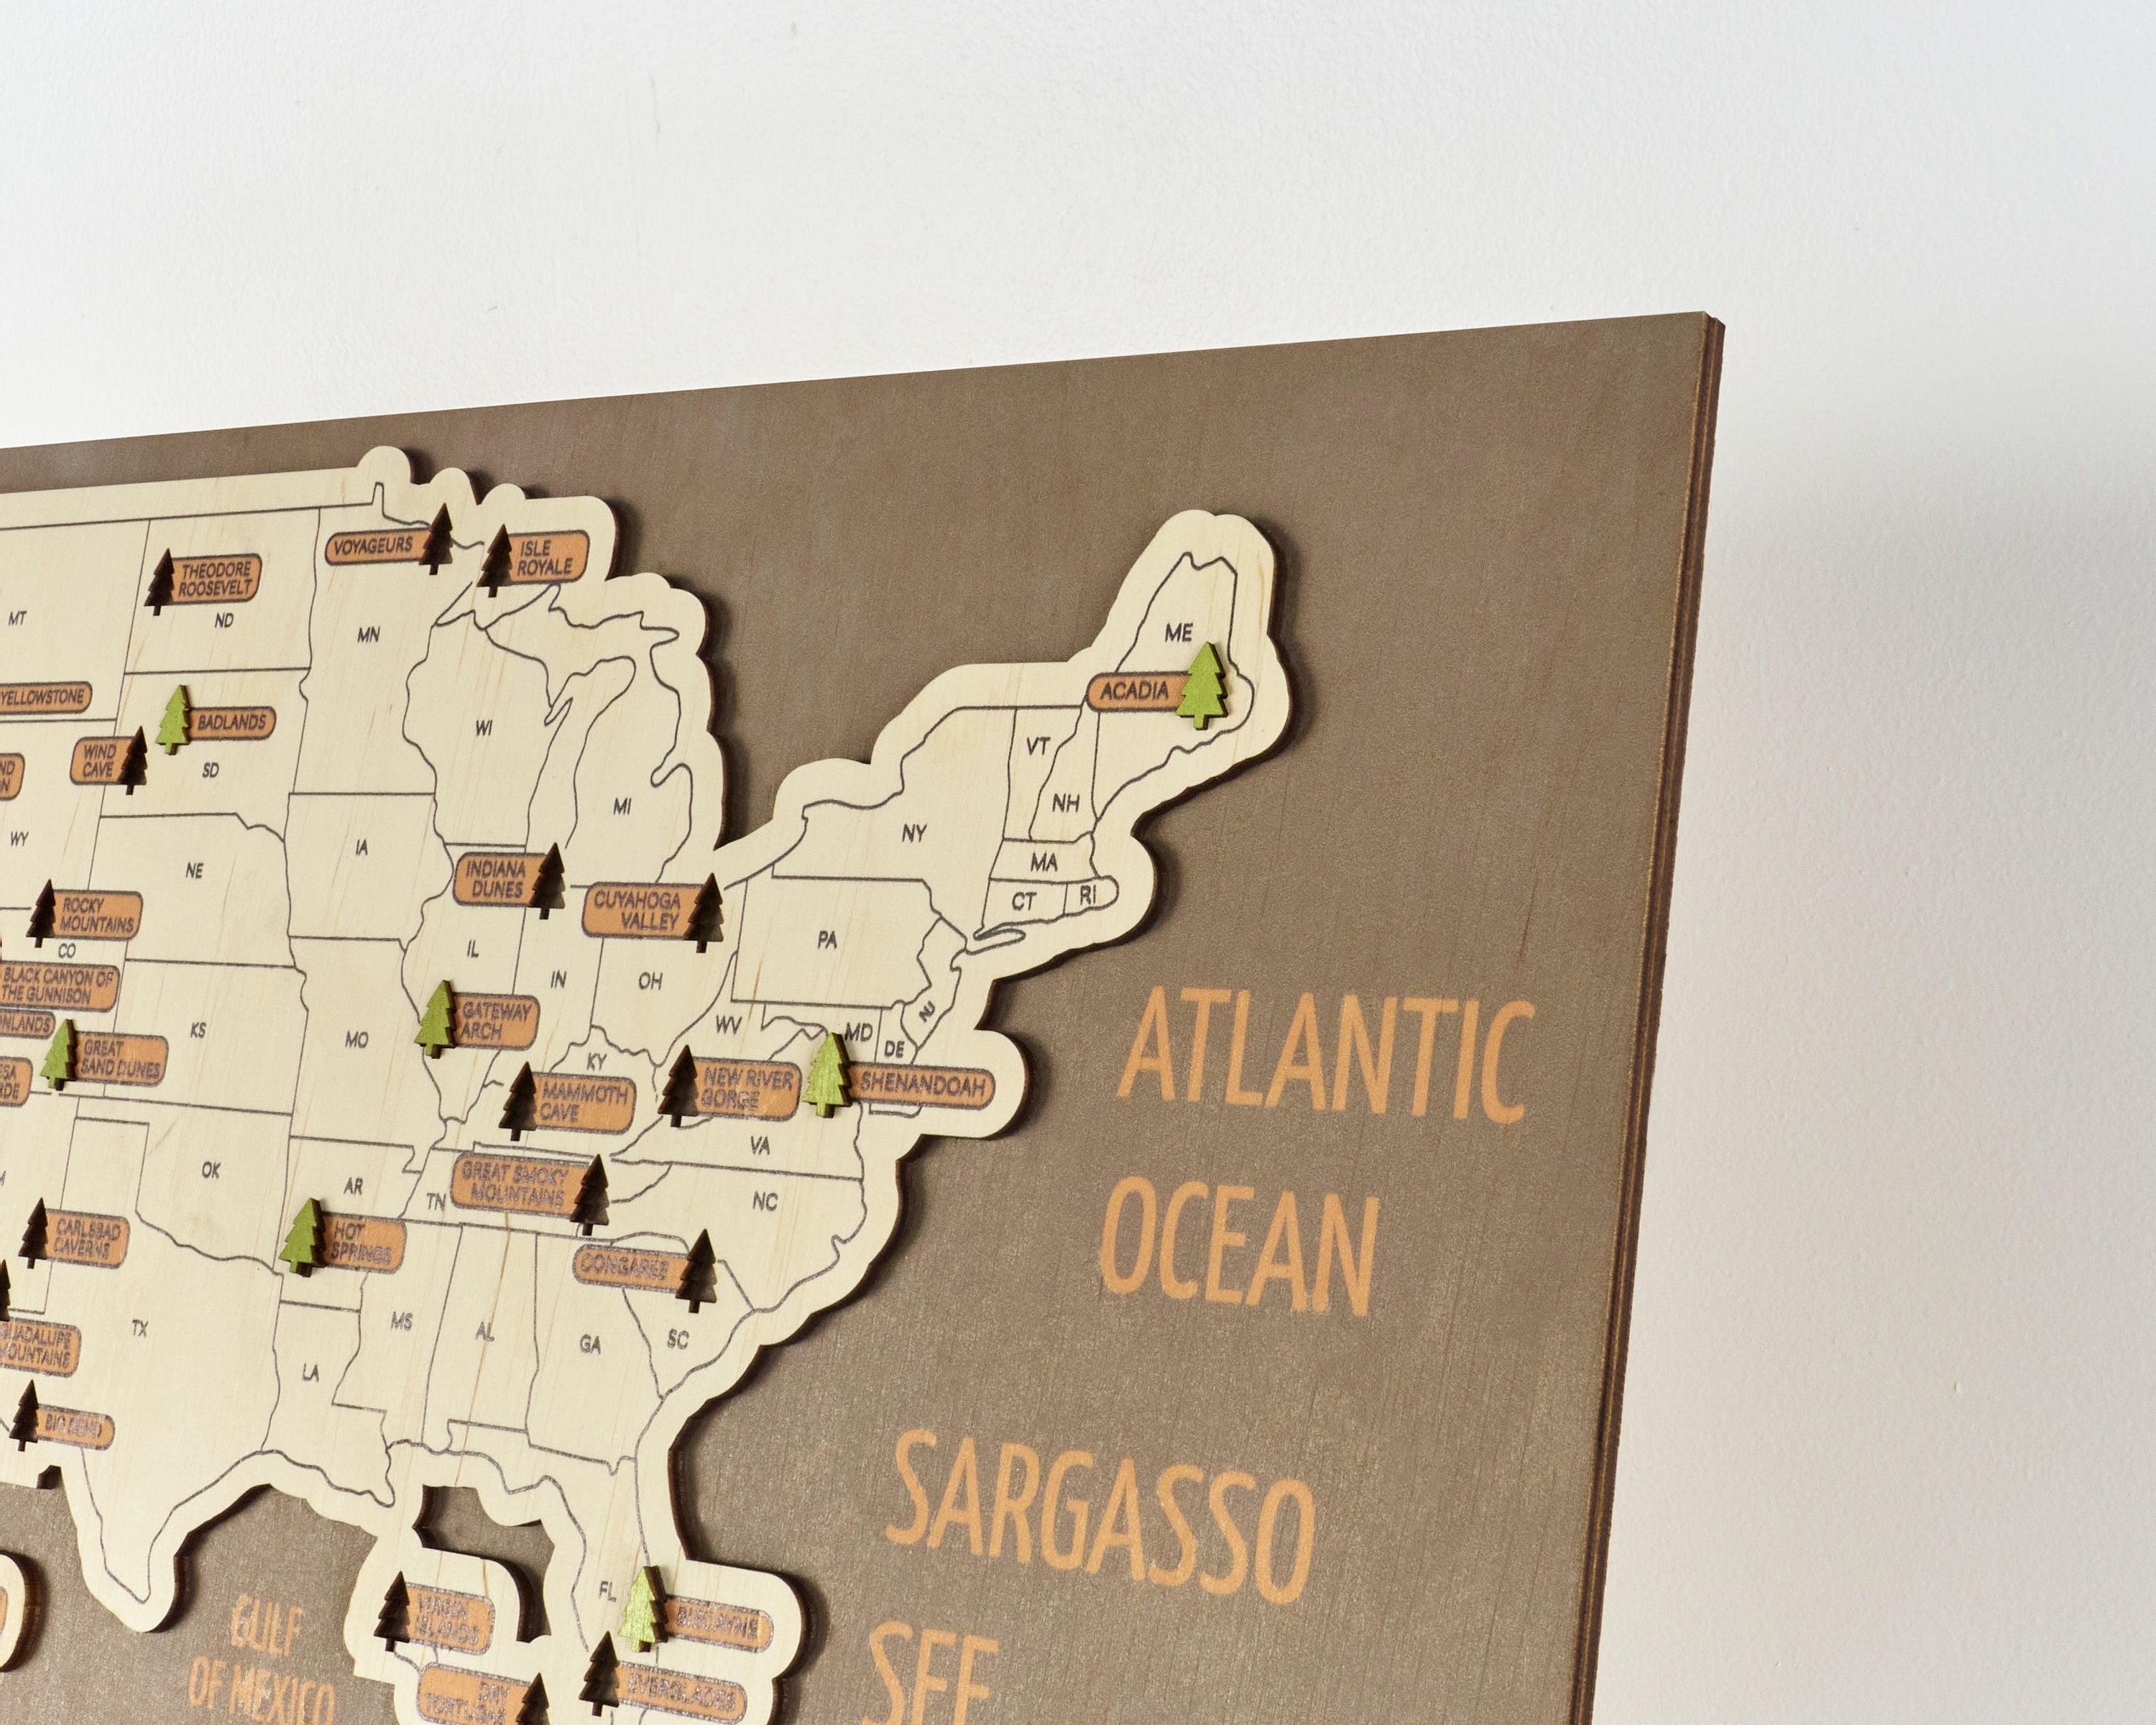 US 3D Wooden National Parks Travel Map With Trees To Record Park Visits (New Brown) - Lemap